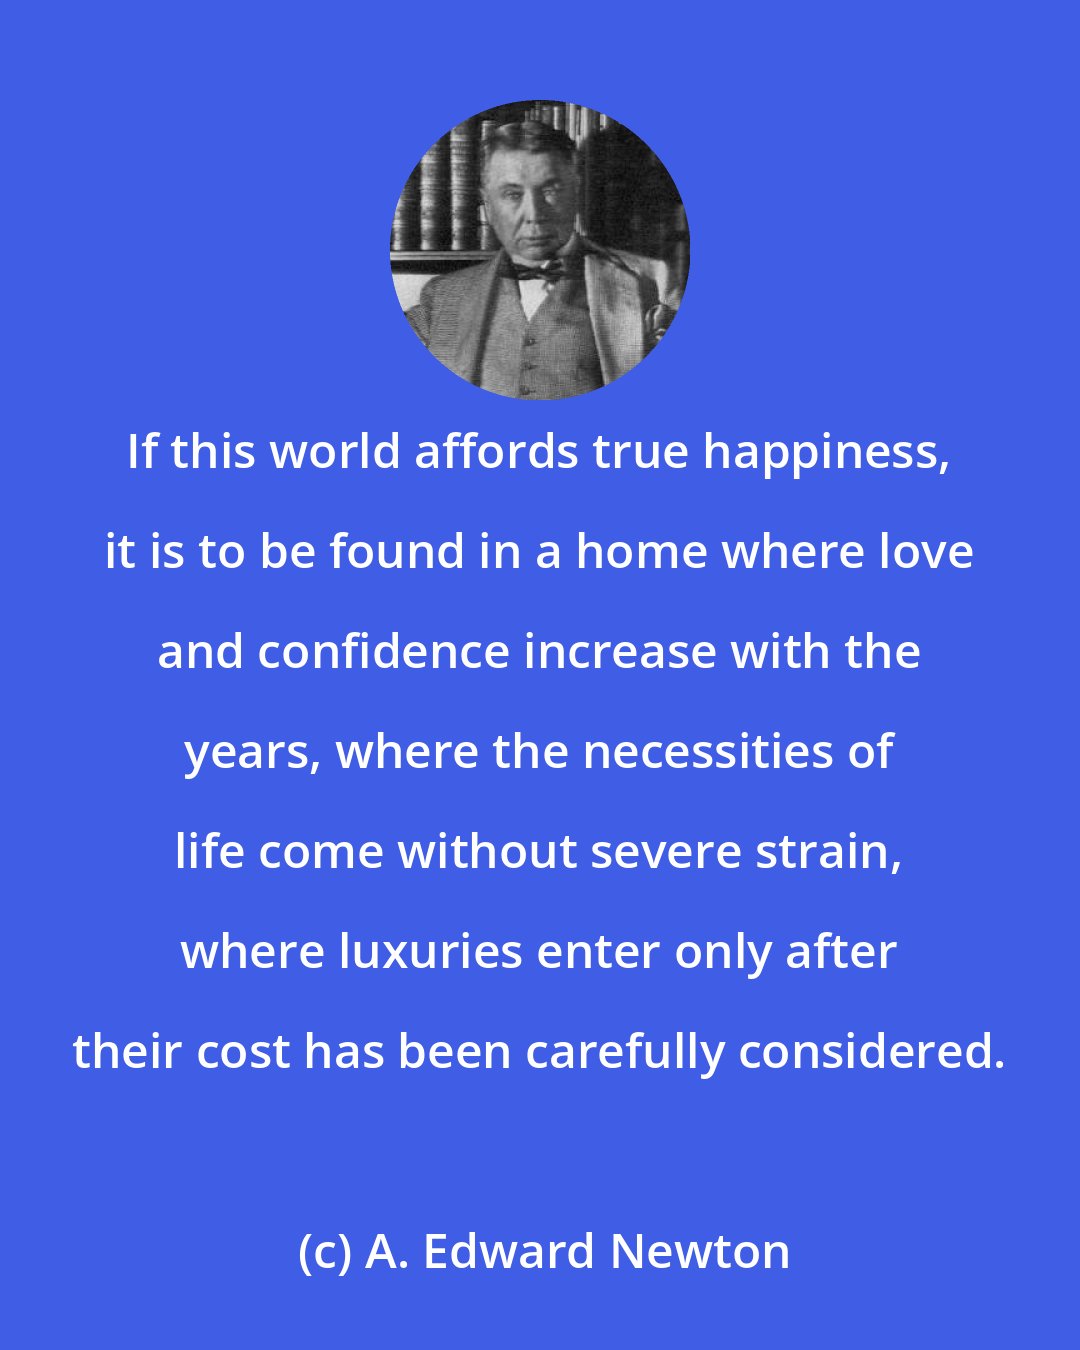 A. Edward Newton: If this world affords true happiness, it is to be found in a home where love and confidence increase with the years, where the necessities of life come without severe strain, where luxuries enter only after their cost has been carefully considered.